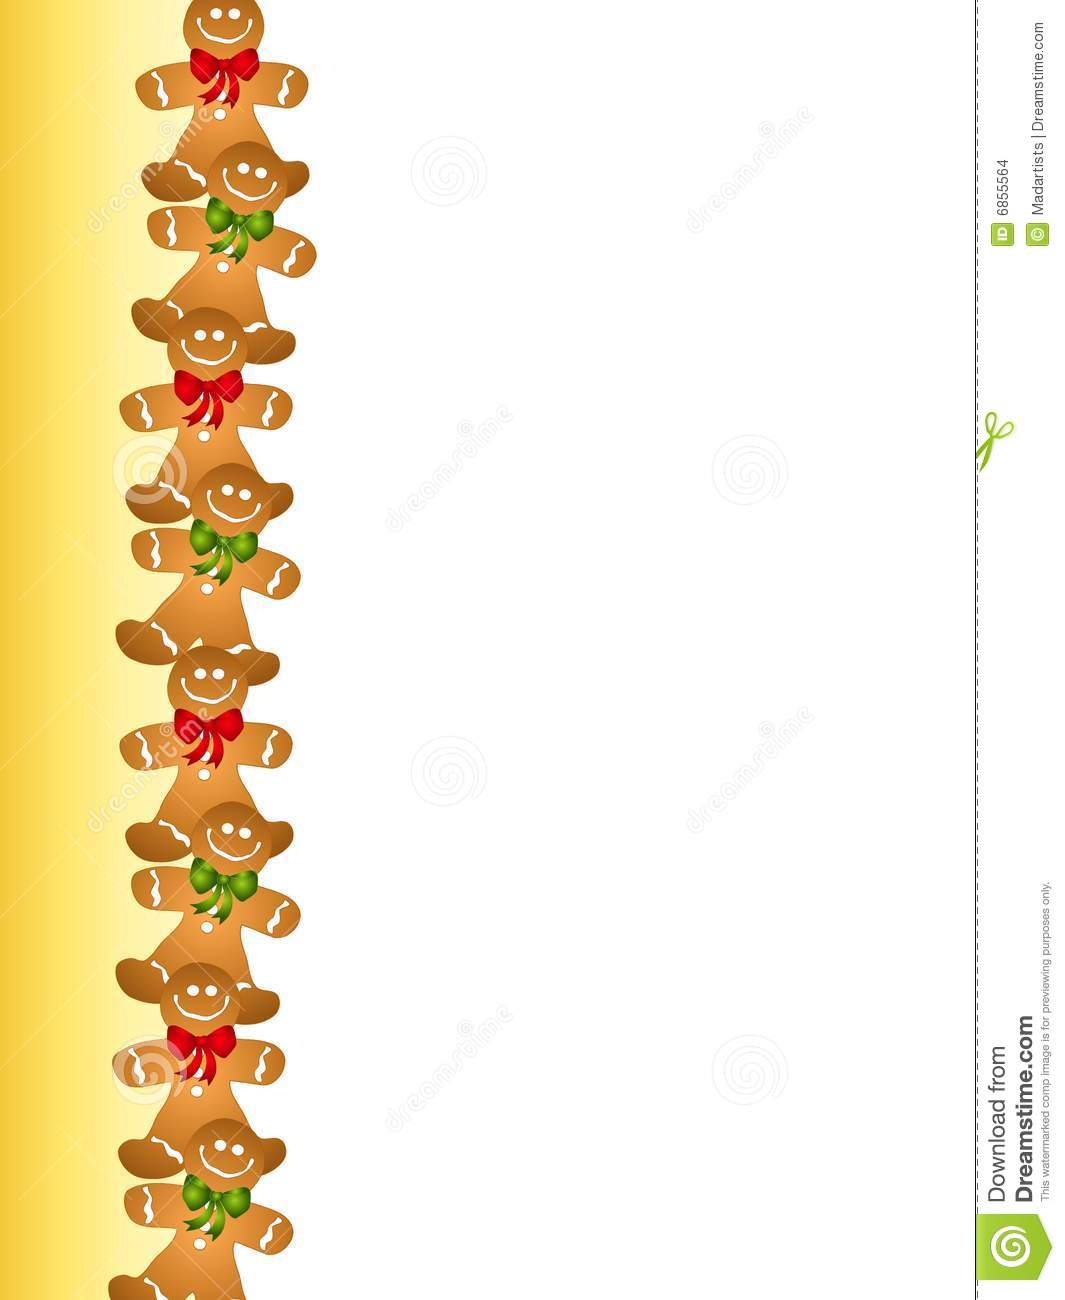 Border Illustration Featuring Gingerbread Men In A Row